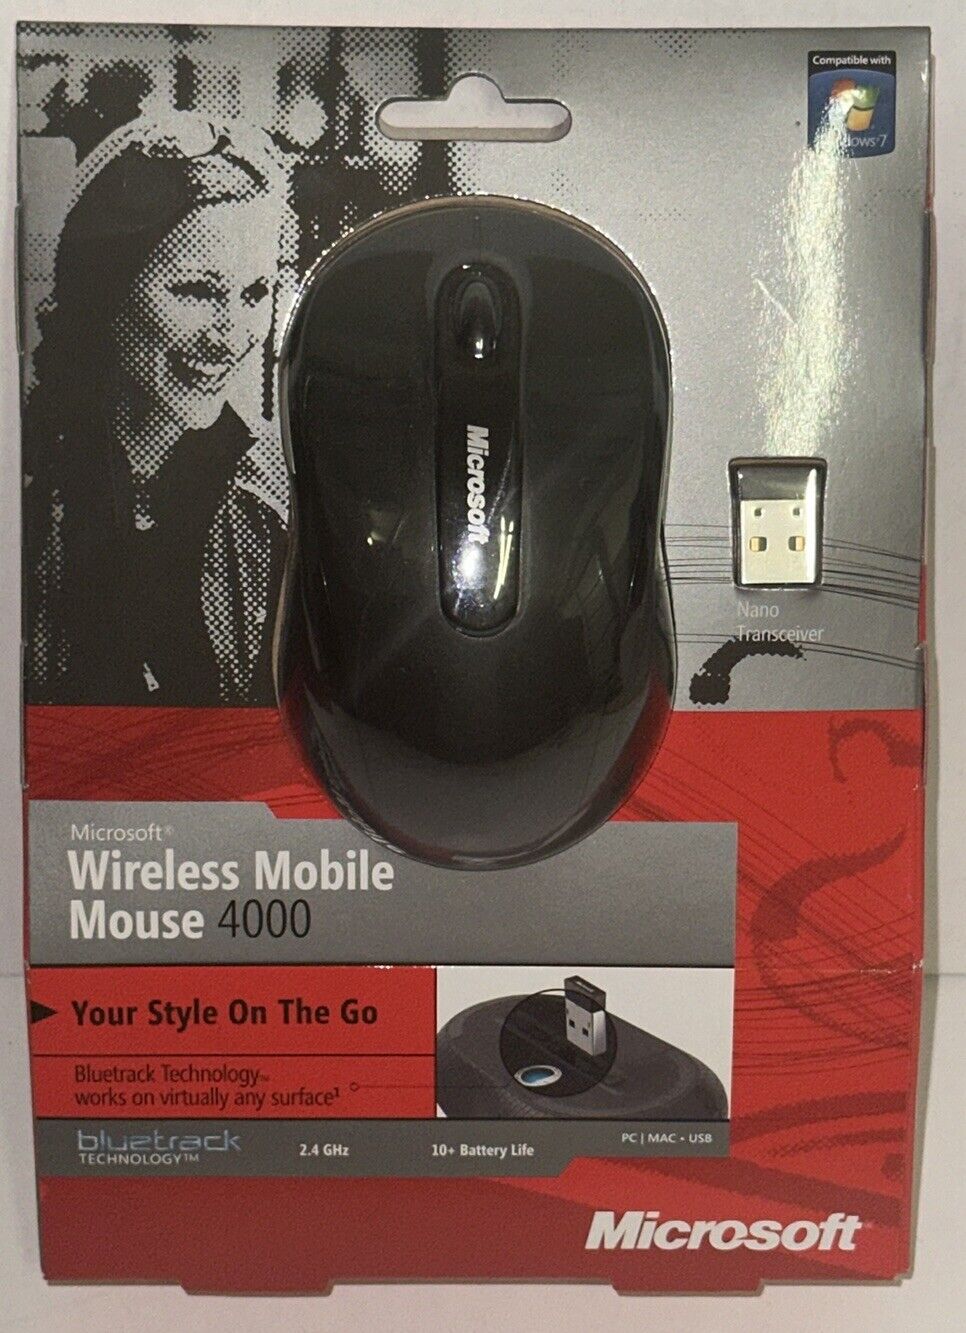 Microsoft Wireless Mobile 4000 Optical Mouse Model 1383 1447 Black New Old Stock